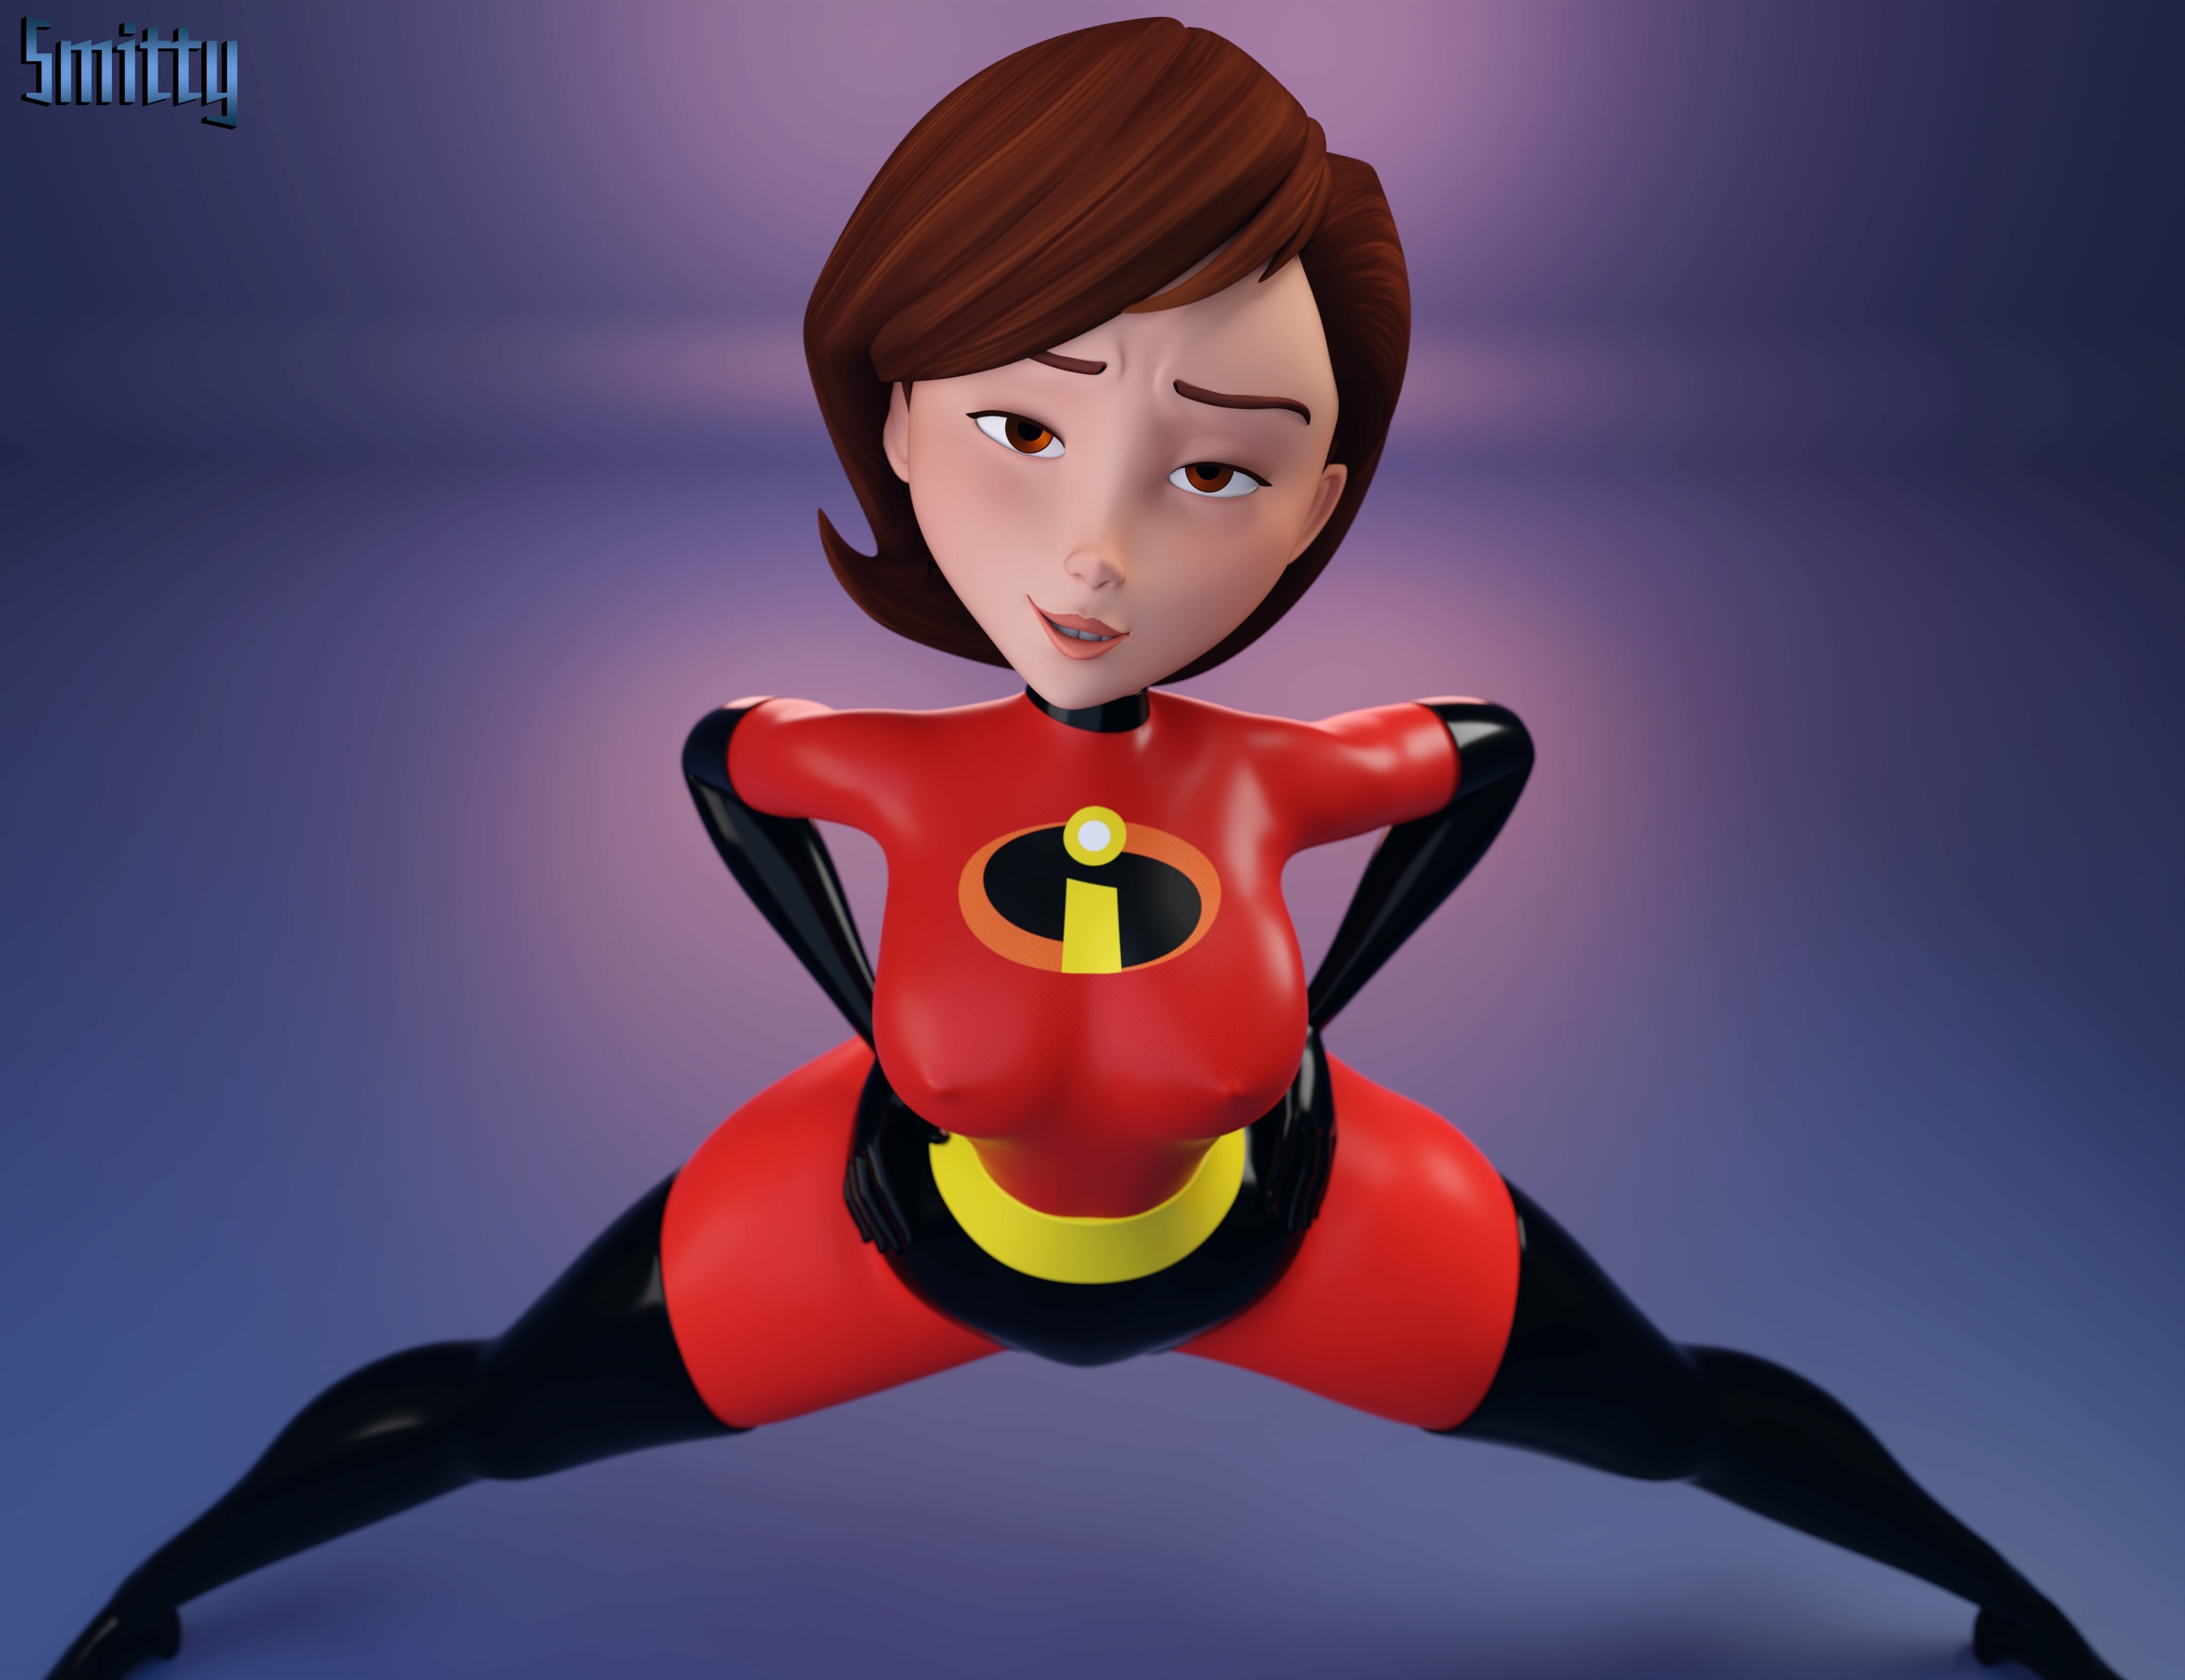 Helen gets the smug fucked out of her. Elastigirl The Incredibles Vaginal Big Dick Cum Boobs Big boobs Big Tits Ass Cake Sexy Horny Face Horny 3d Porn